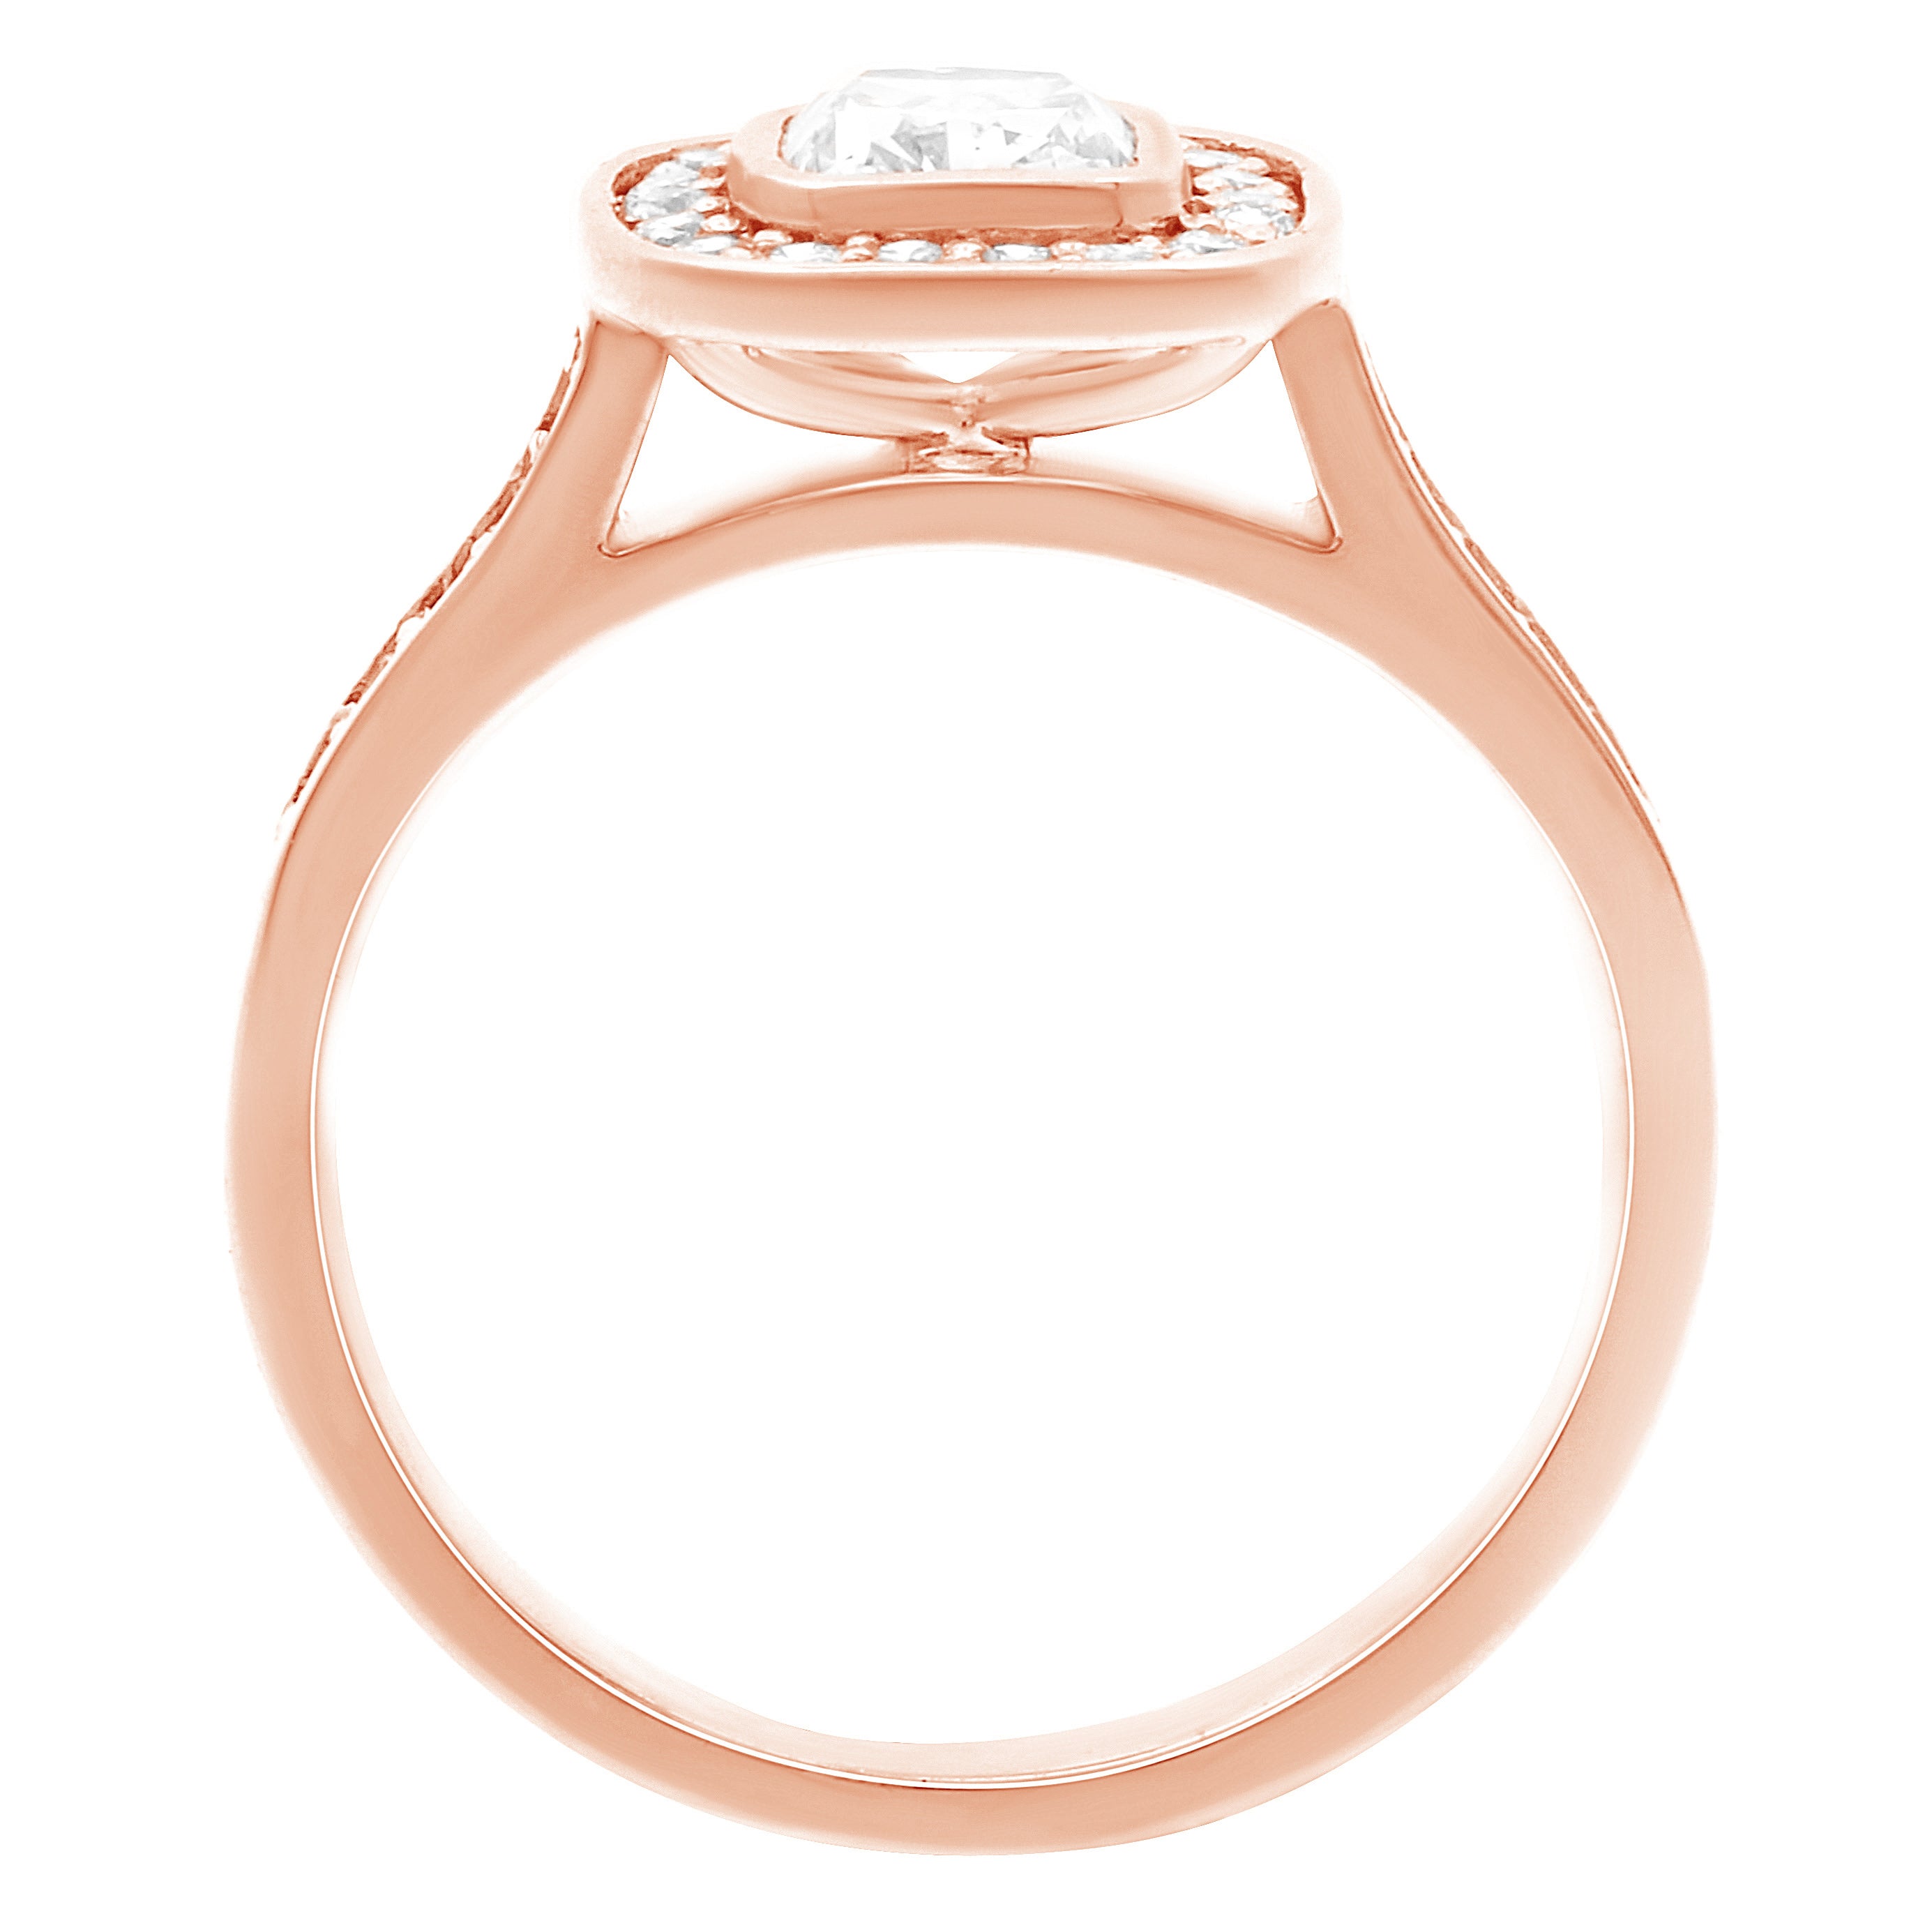 Cushion Cut Bezel Diamond Ring in rose gold in upright position